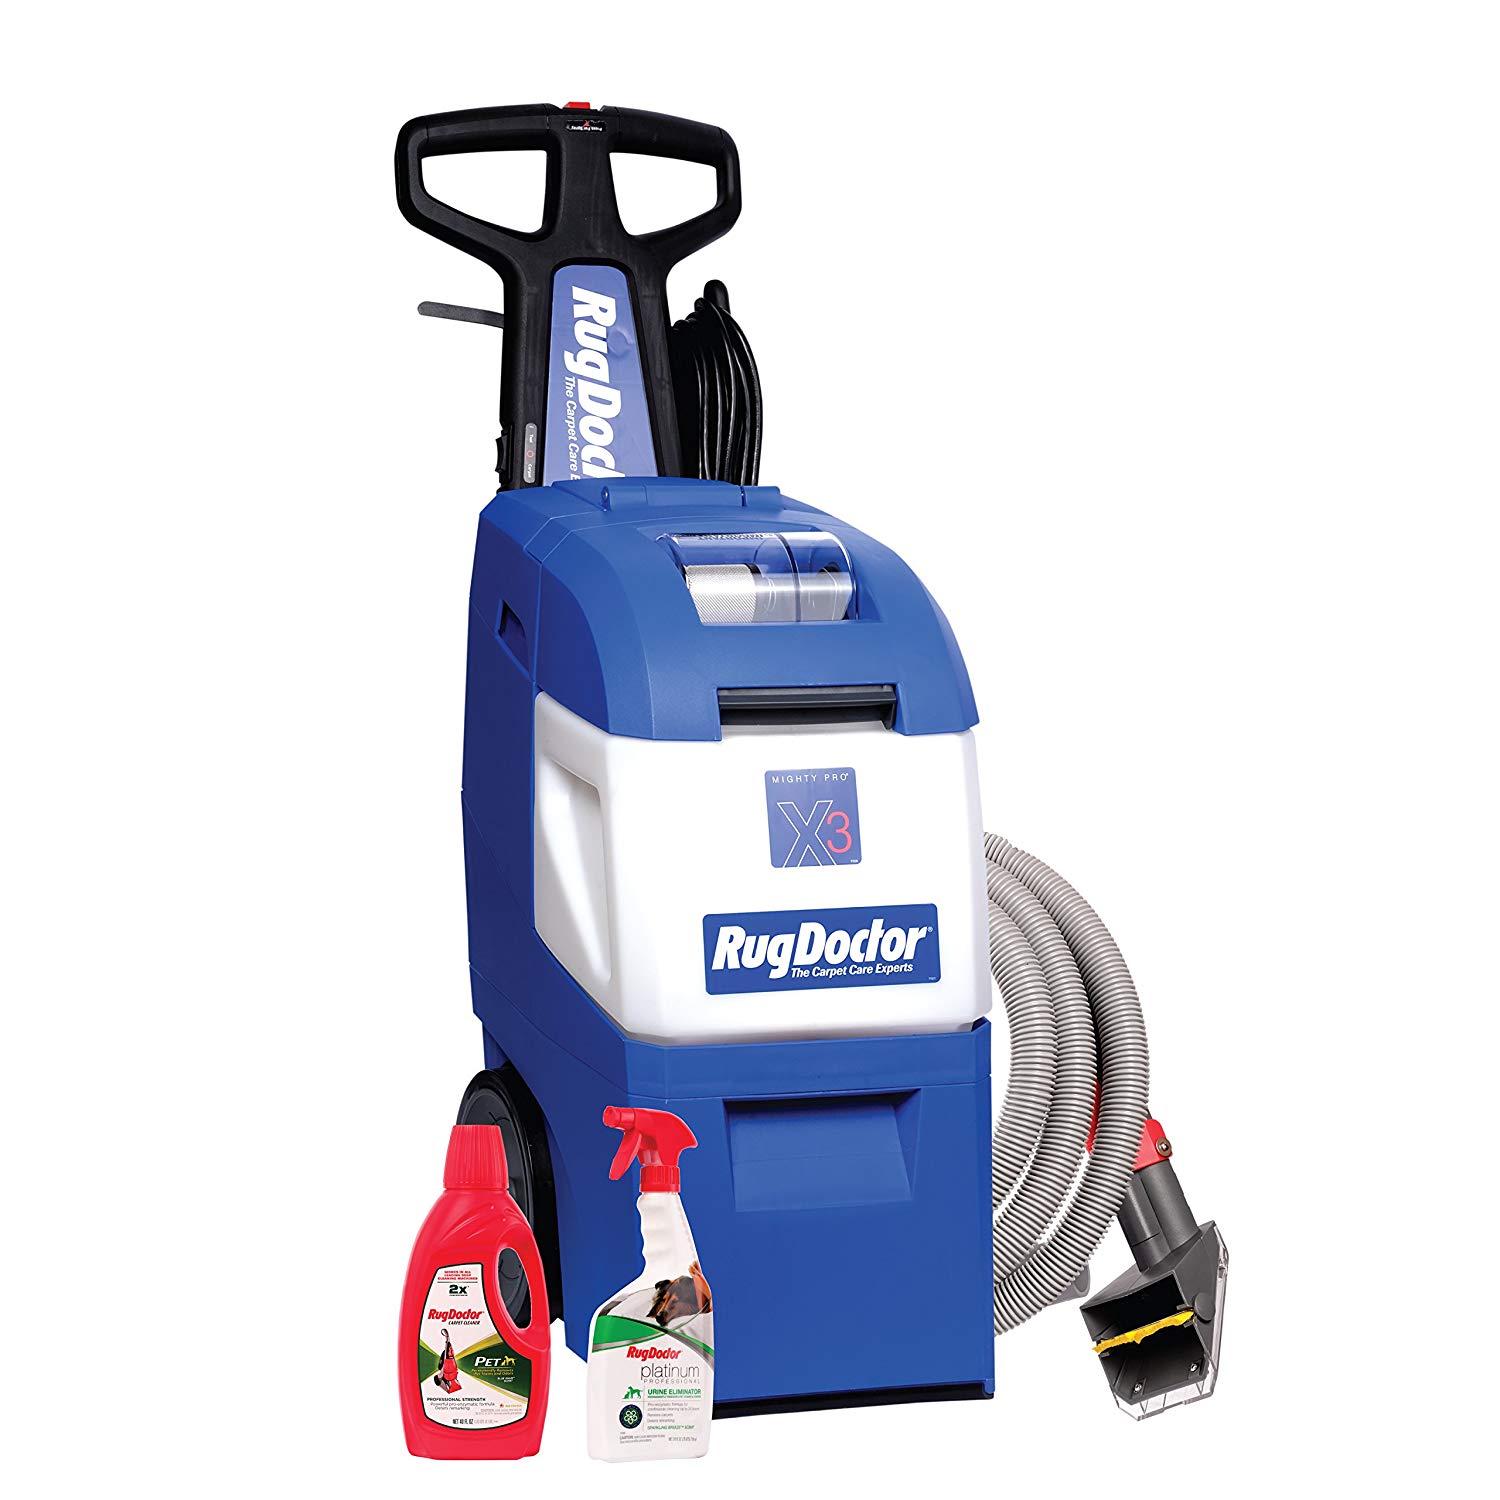 Rug Doctor Mighty Pro X3 Carpet Cleaner Review - CleaningFever